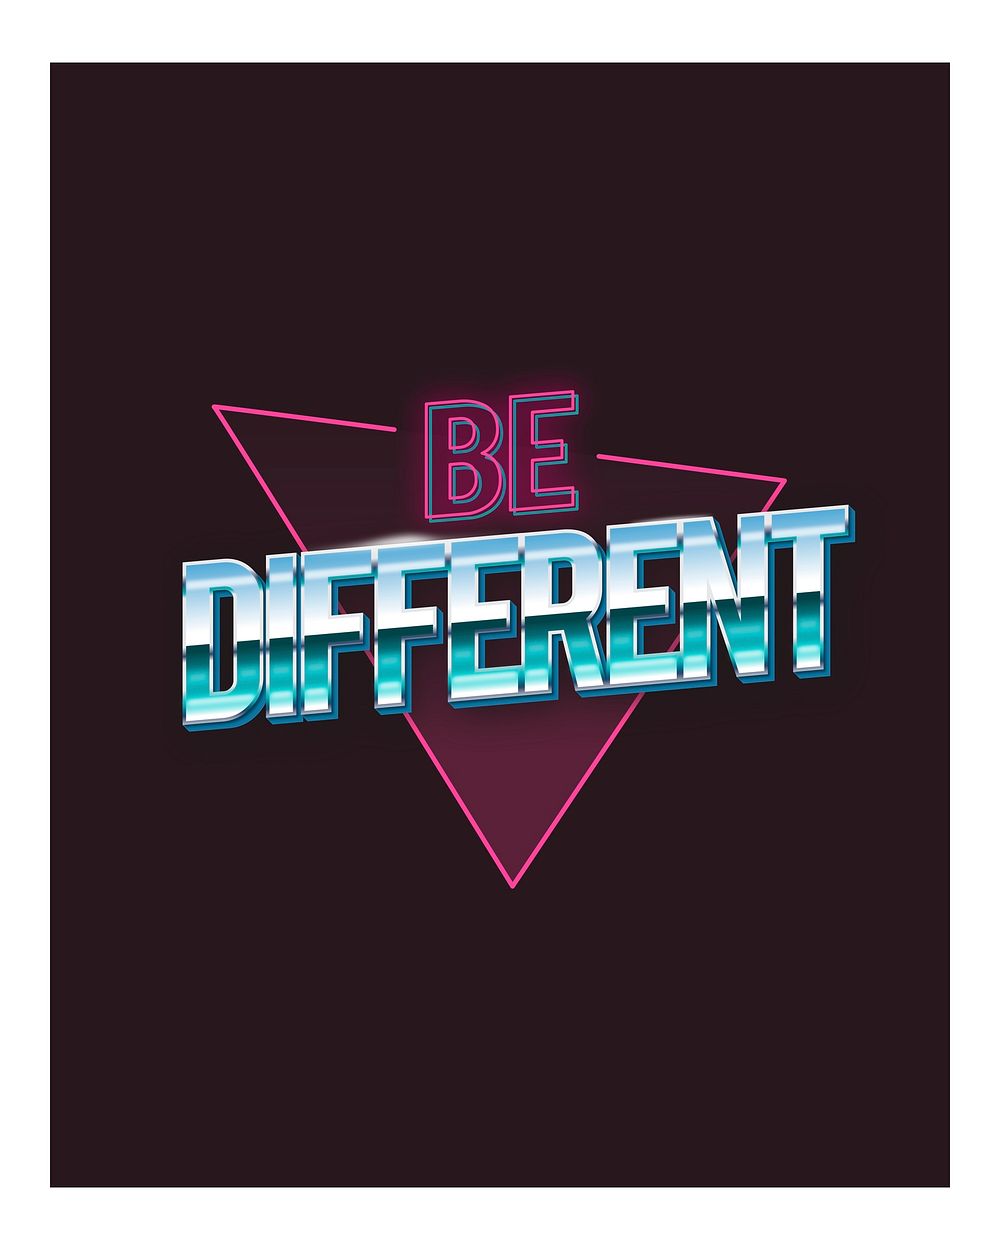 Be different illustration wall art print and poster.